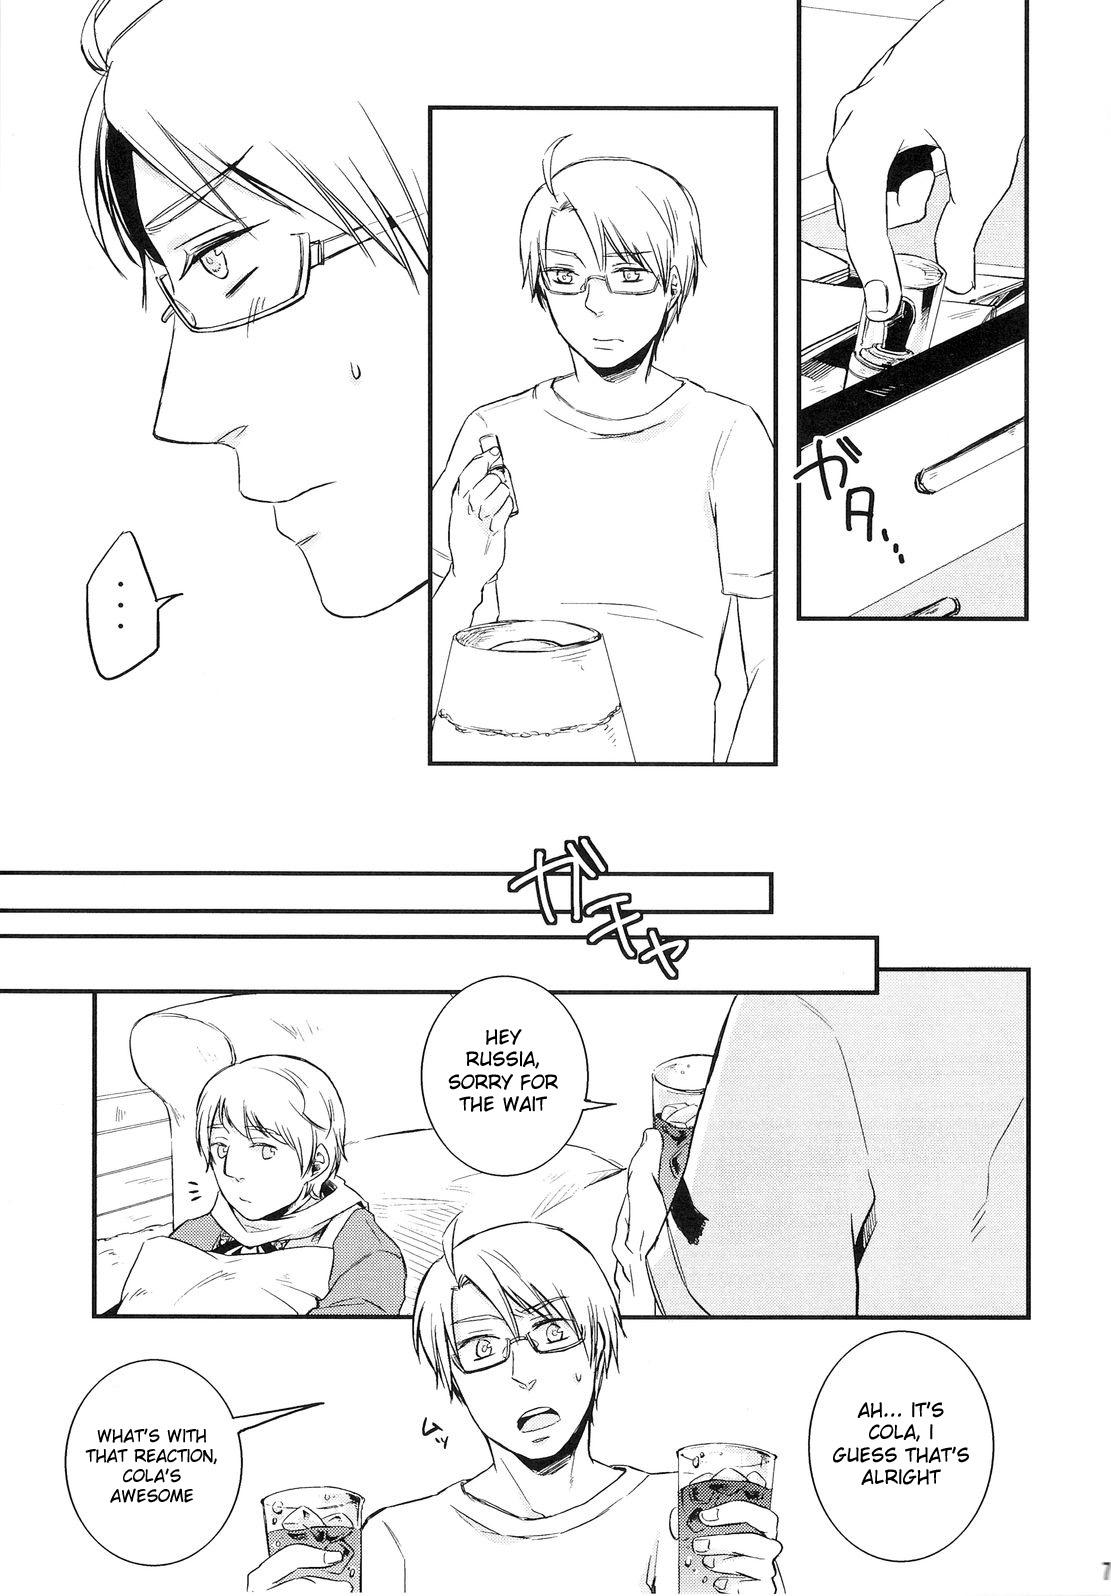 Amatures Gone Wild NO PROBLEM - Axis powers hetalia Granny - Page 6